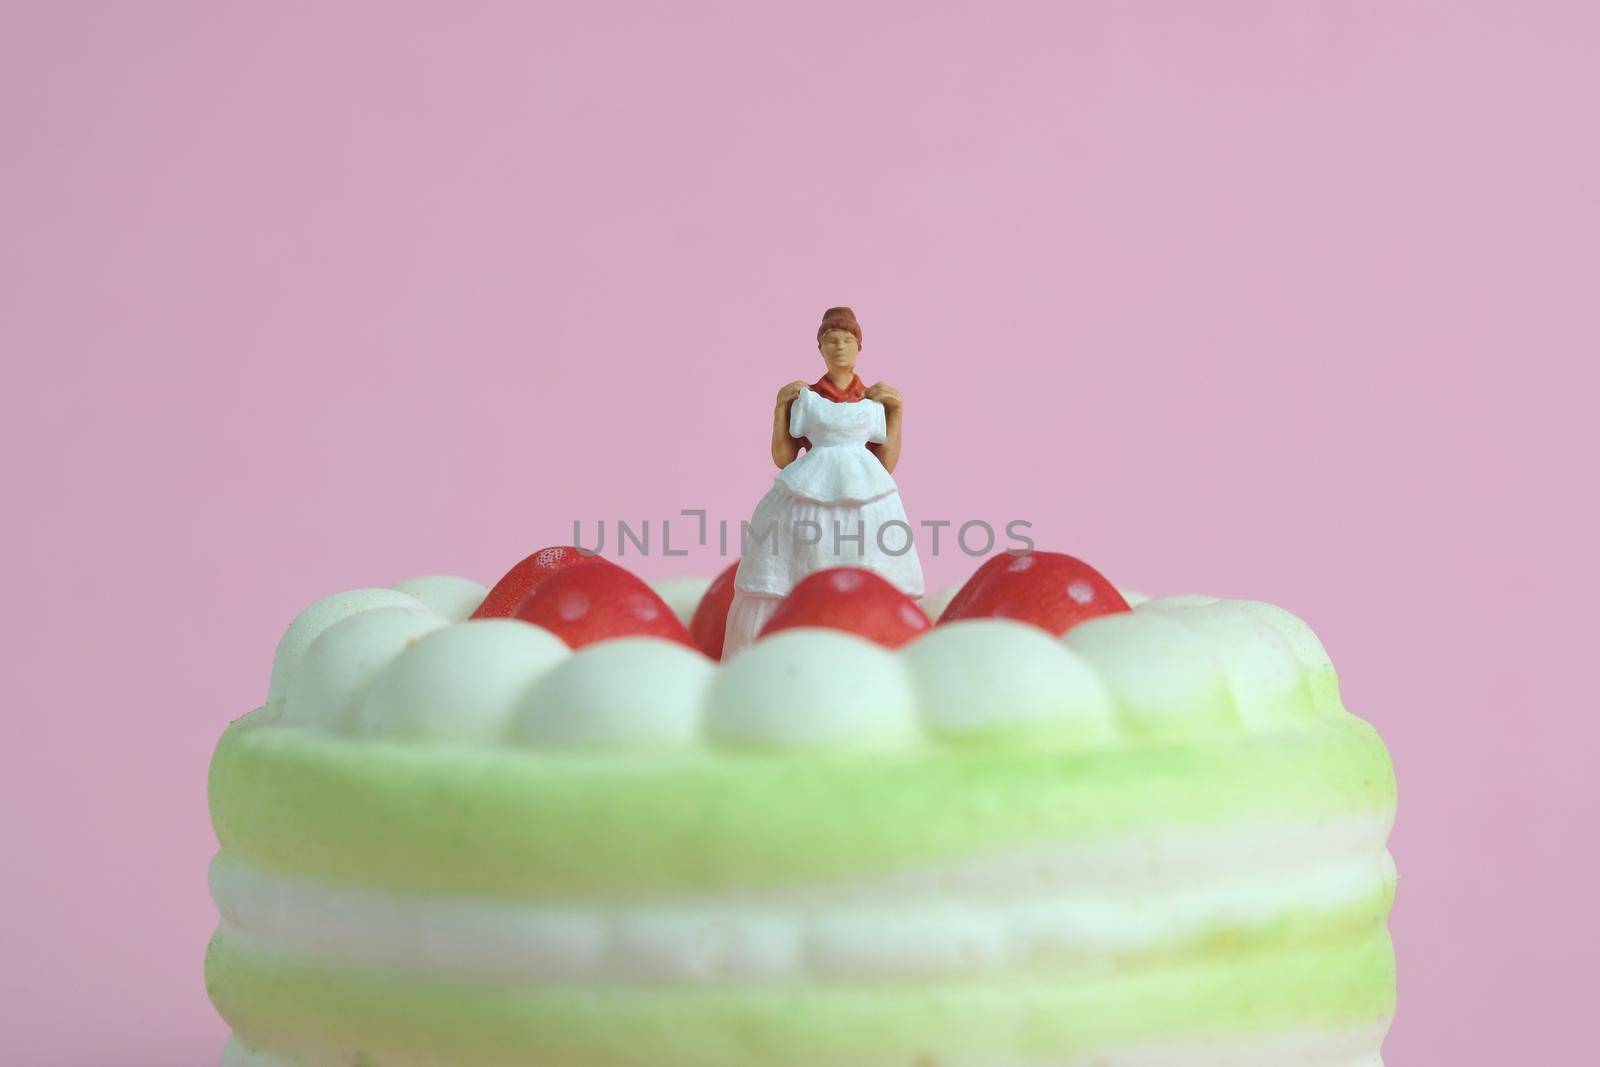 Woman dieting from cake before wedding day concept. Miniature people toys photography, girl holding wedding dress. Image photo by Macrostud